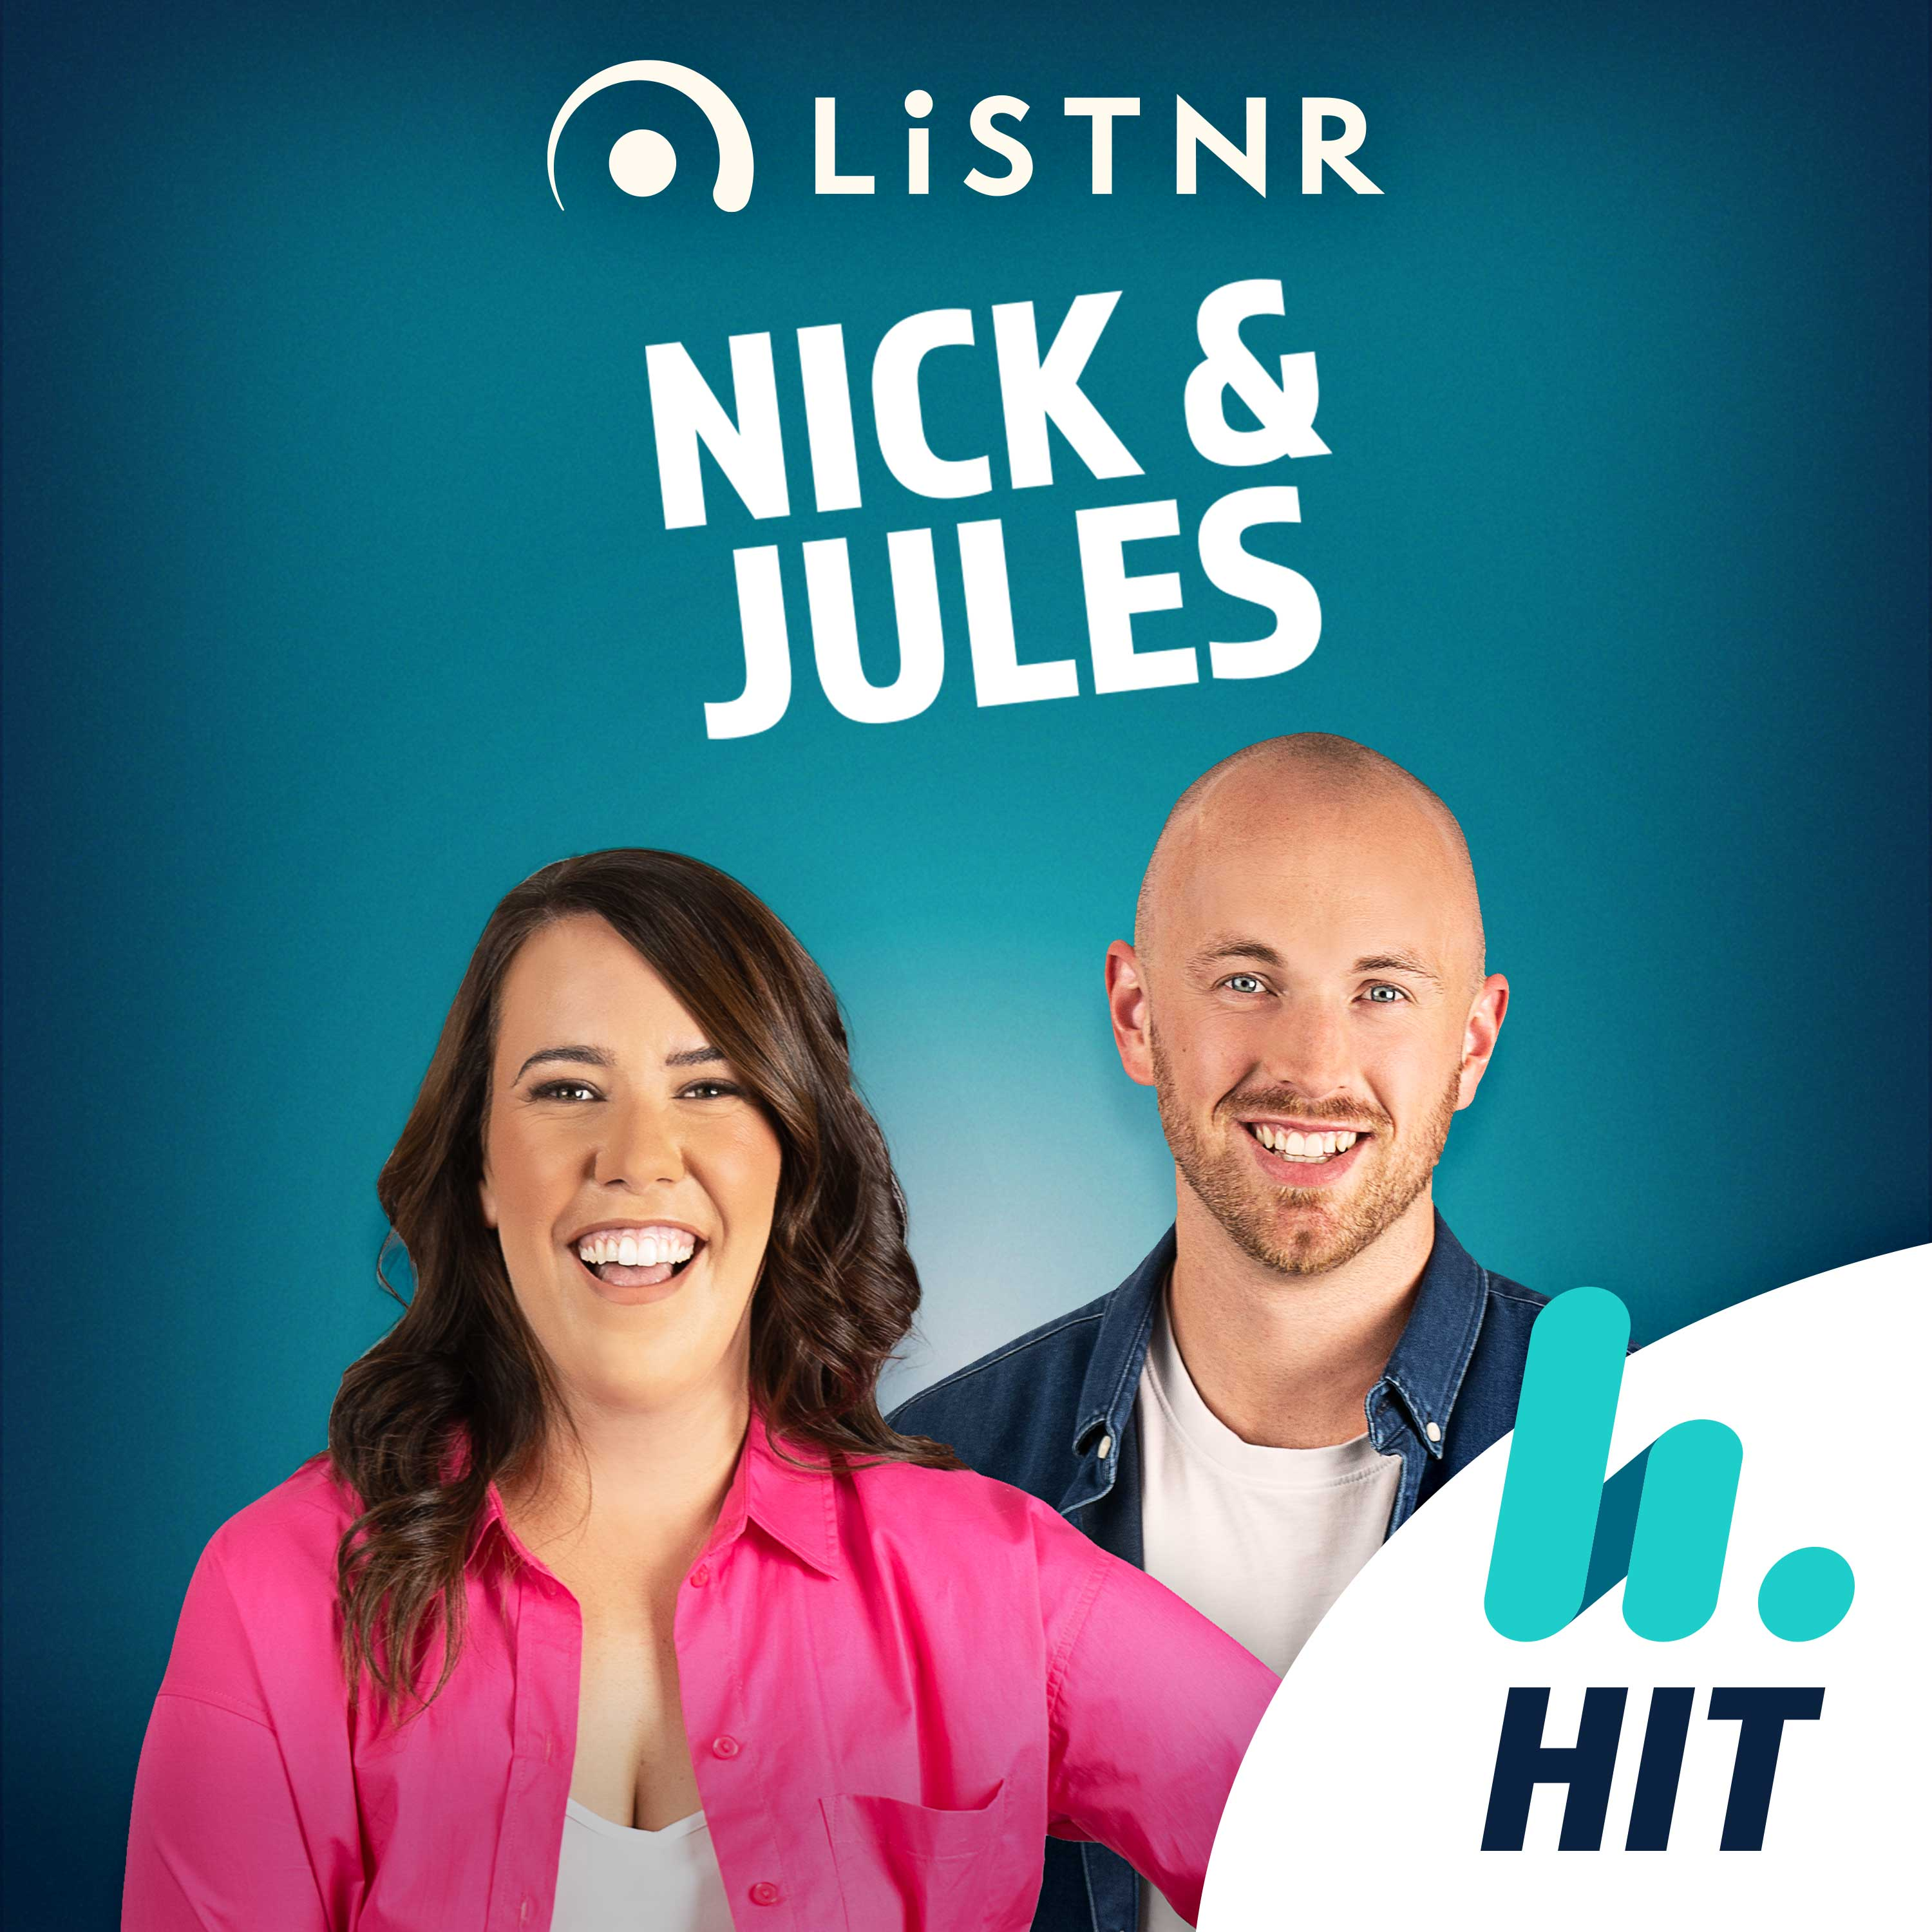 Off Air with Nick & Jules: Danielle Bradbery and COMEDY CRUISE